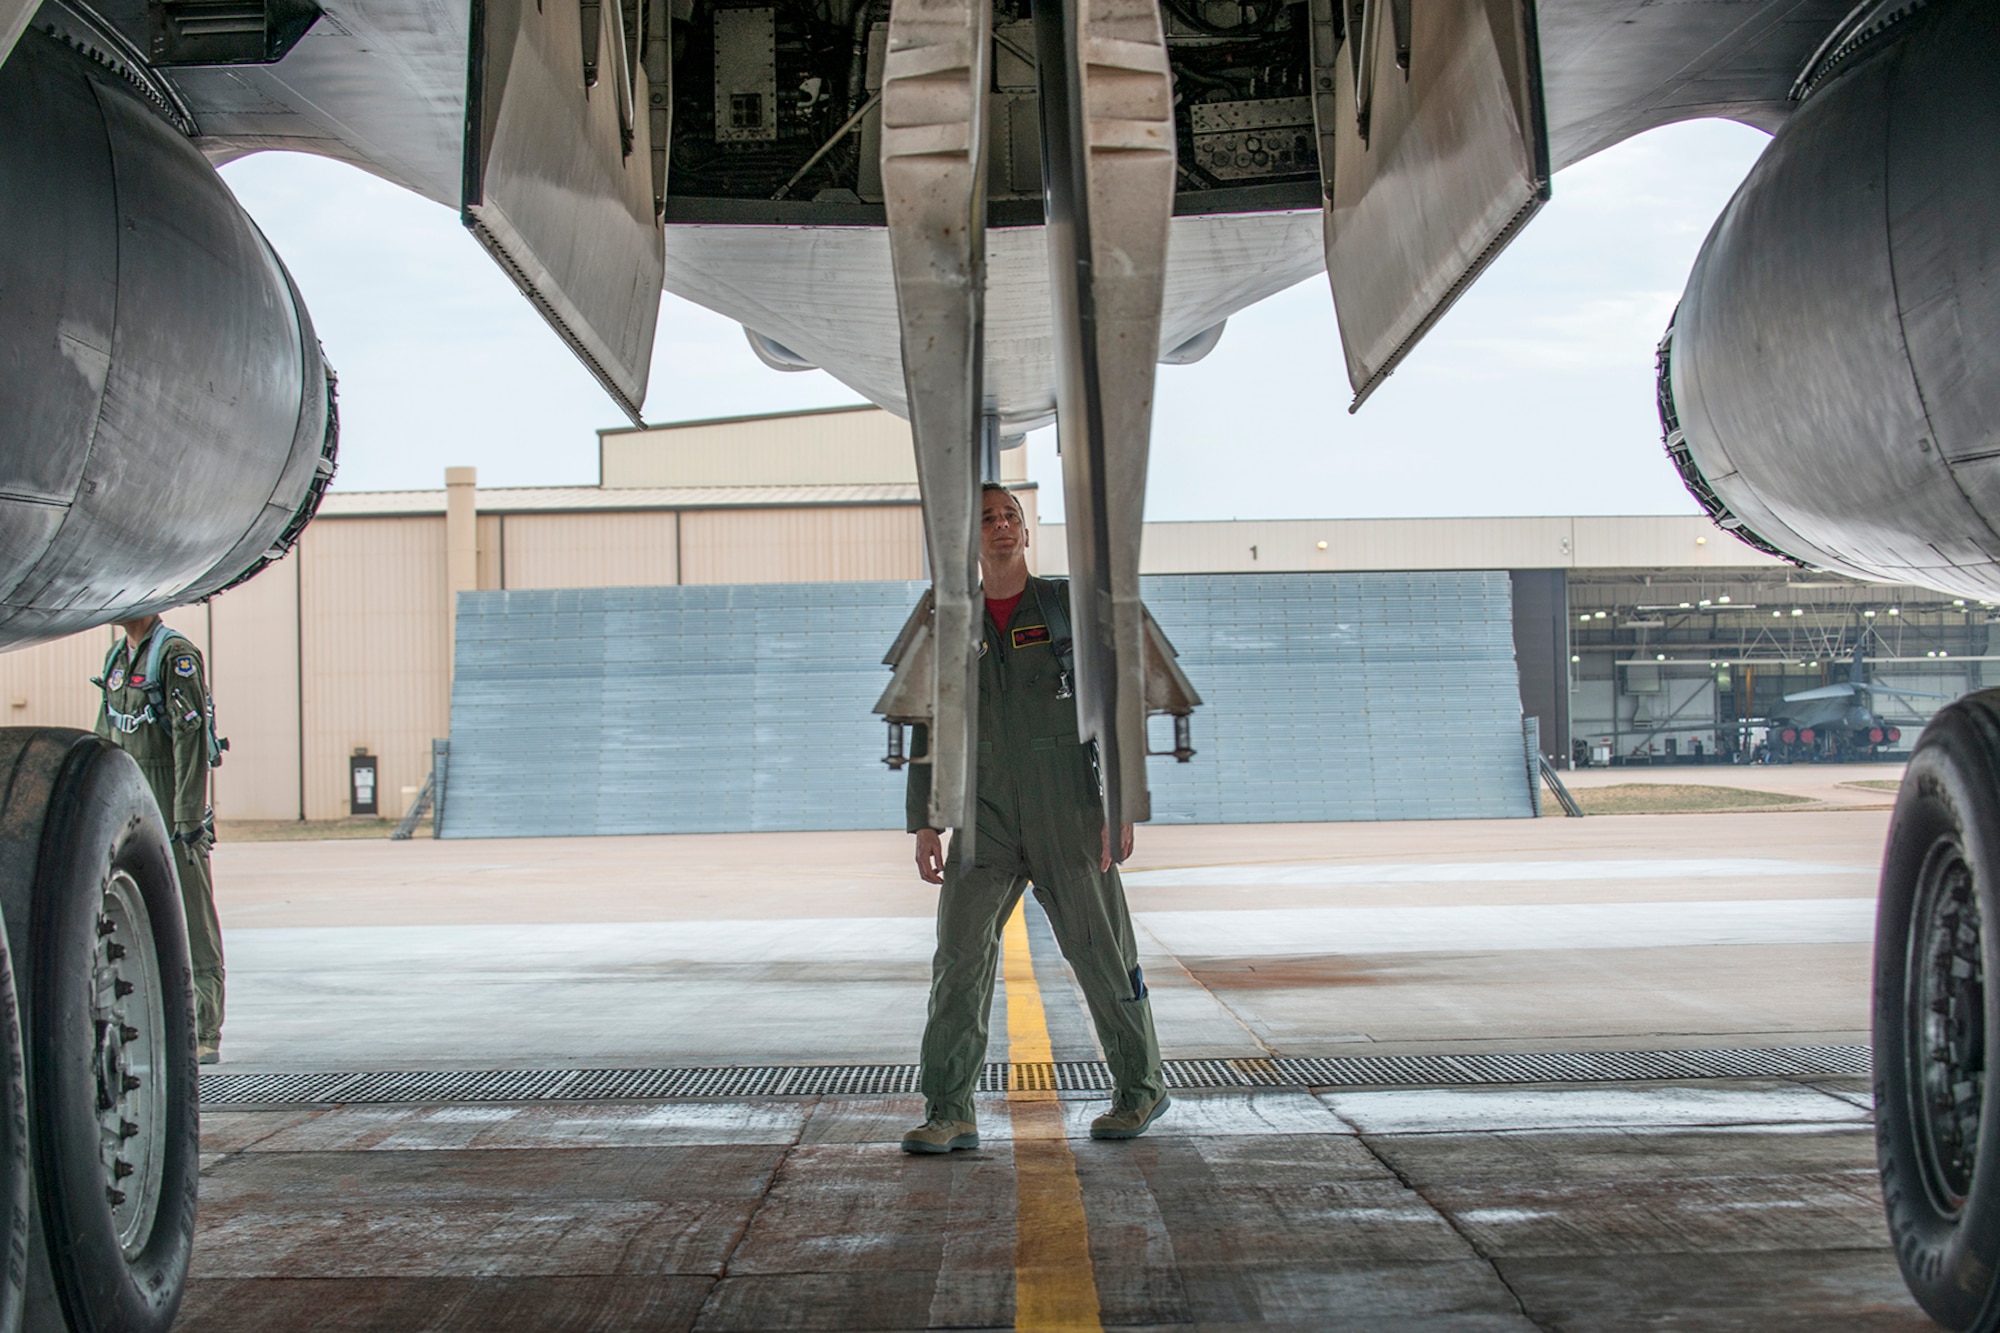 U.S. Air Force Col. Denis Heinz, a weapons systems officer, performs a preflight inspection of a B-1 Lancer prior to a mission on Feb. 20, 2016, Dyess Air Force Base (AFB), Texas. Heinz is Commander of the Air Force Reserve Command’s 489th Bomb Group at Dyess, which is assigned under the 307th Bomb Wing at Barksdale AFB, La. (U.S. Air Force photo by Master Sgt. Greg Steele/Released)